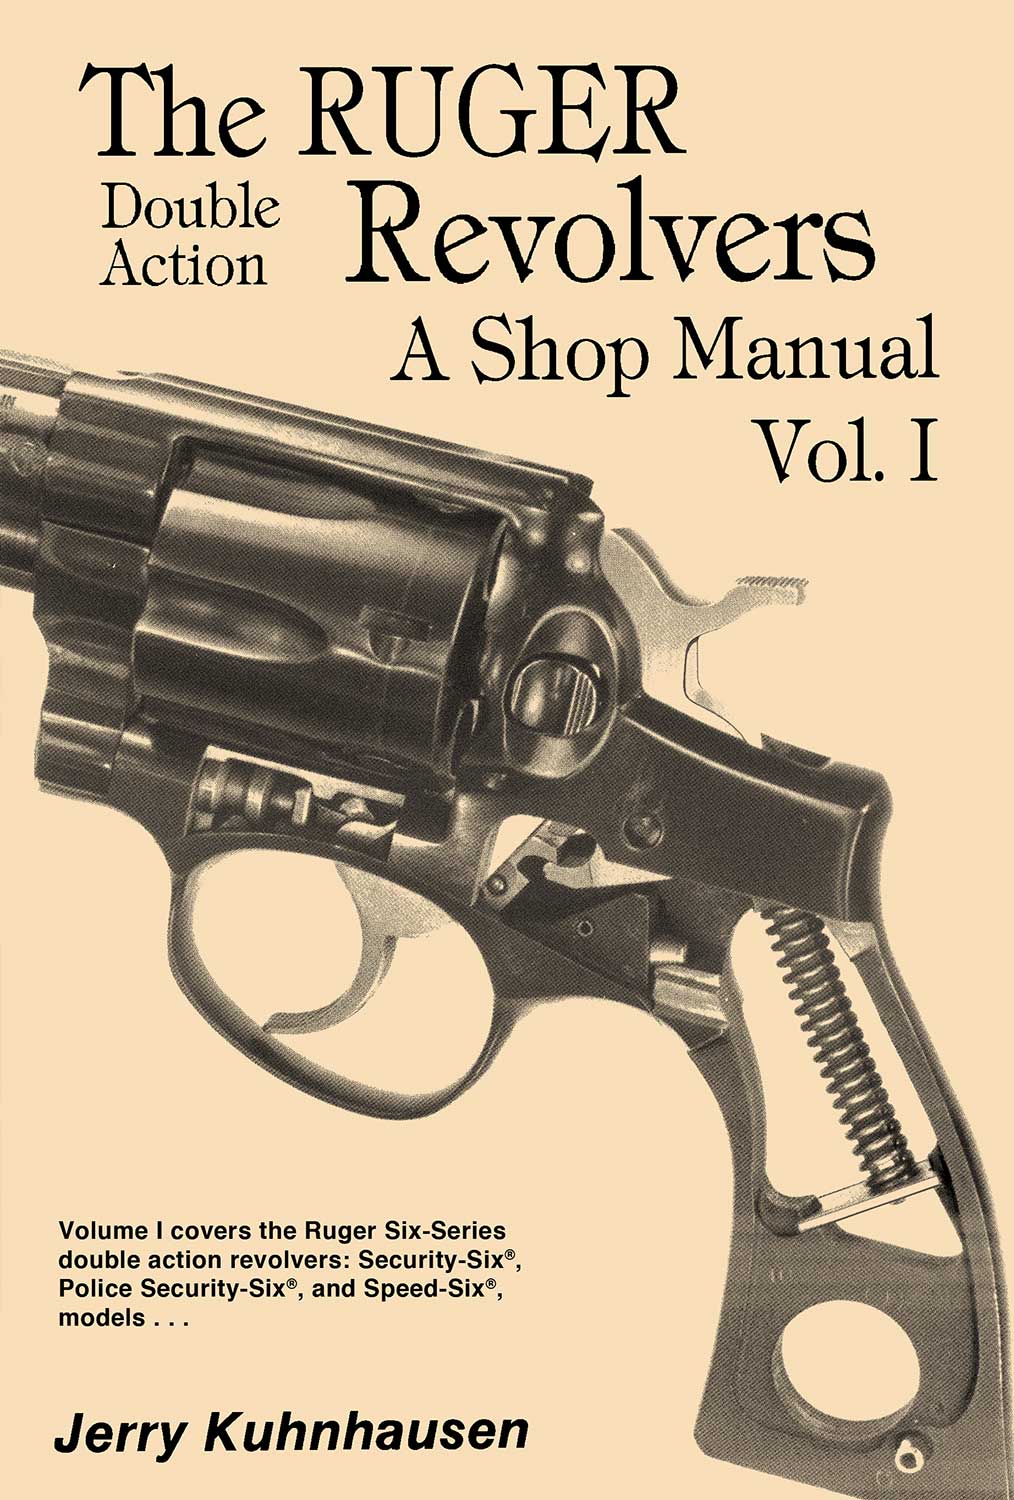 book cover ruger double action